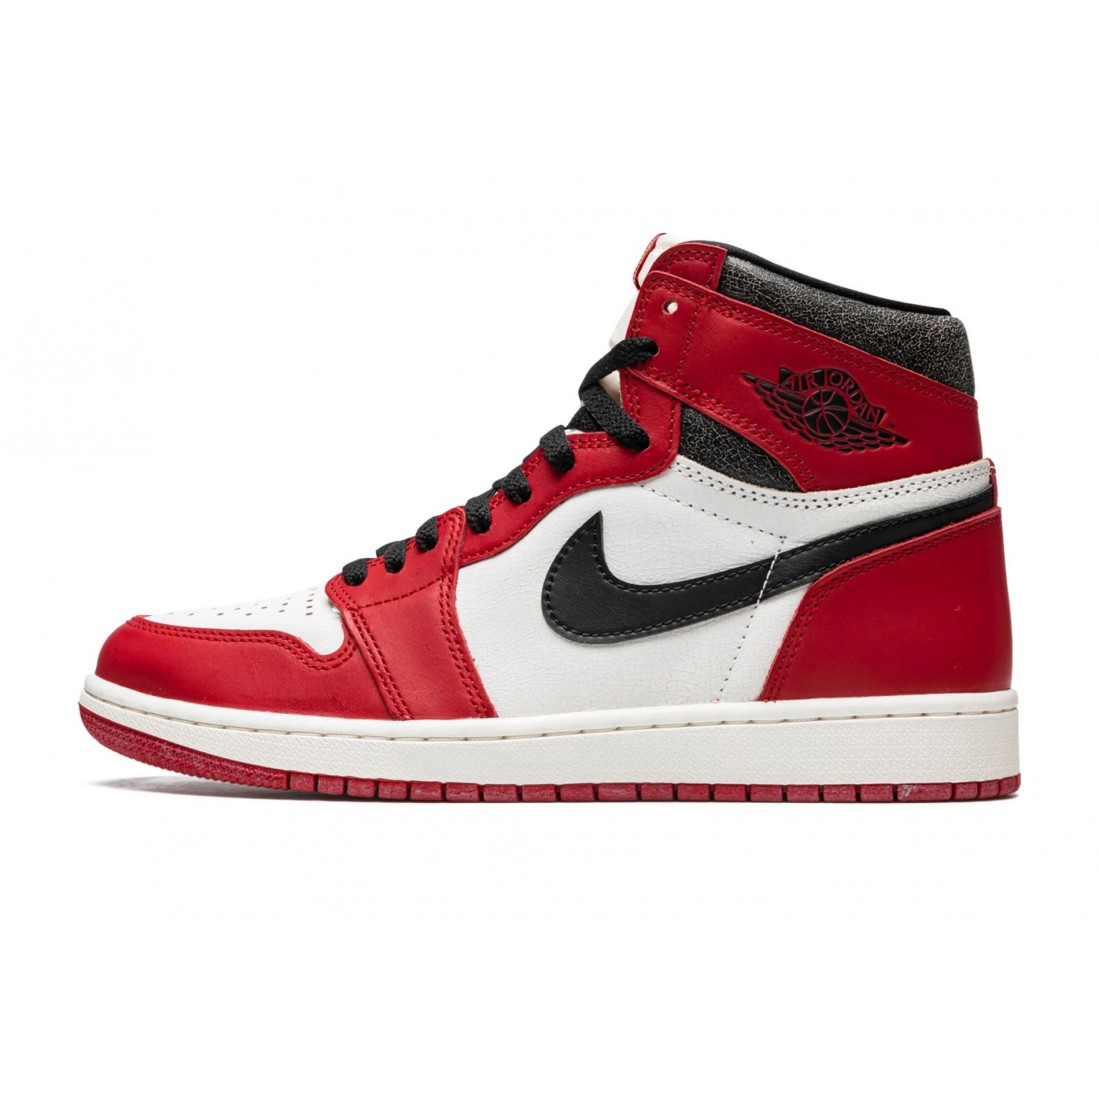 AIR JORDAN 1 RETRO HIGH OG "Chicago Lost and Found"